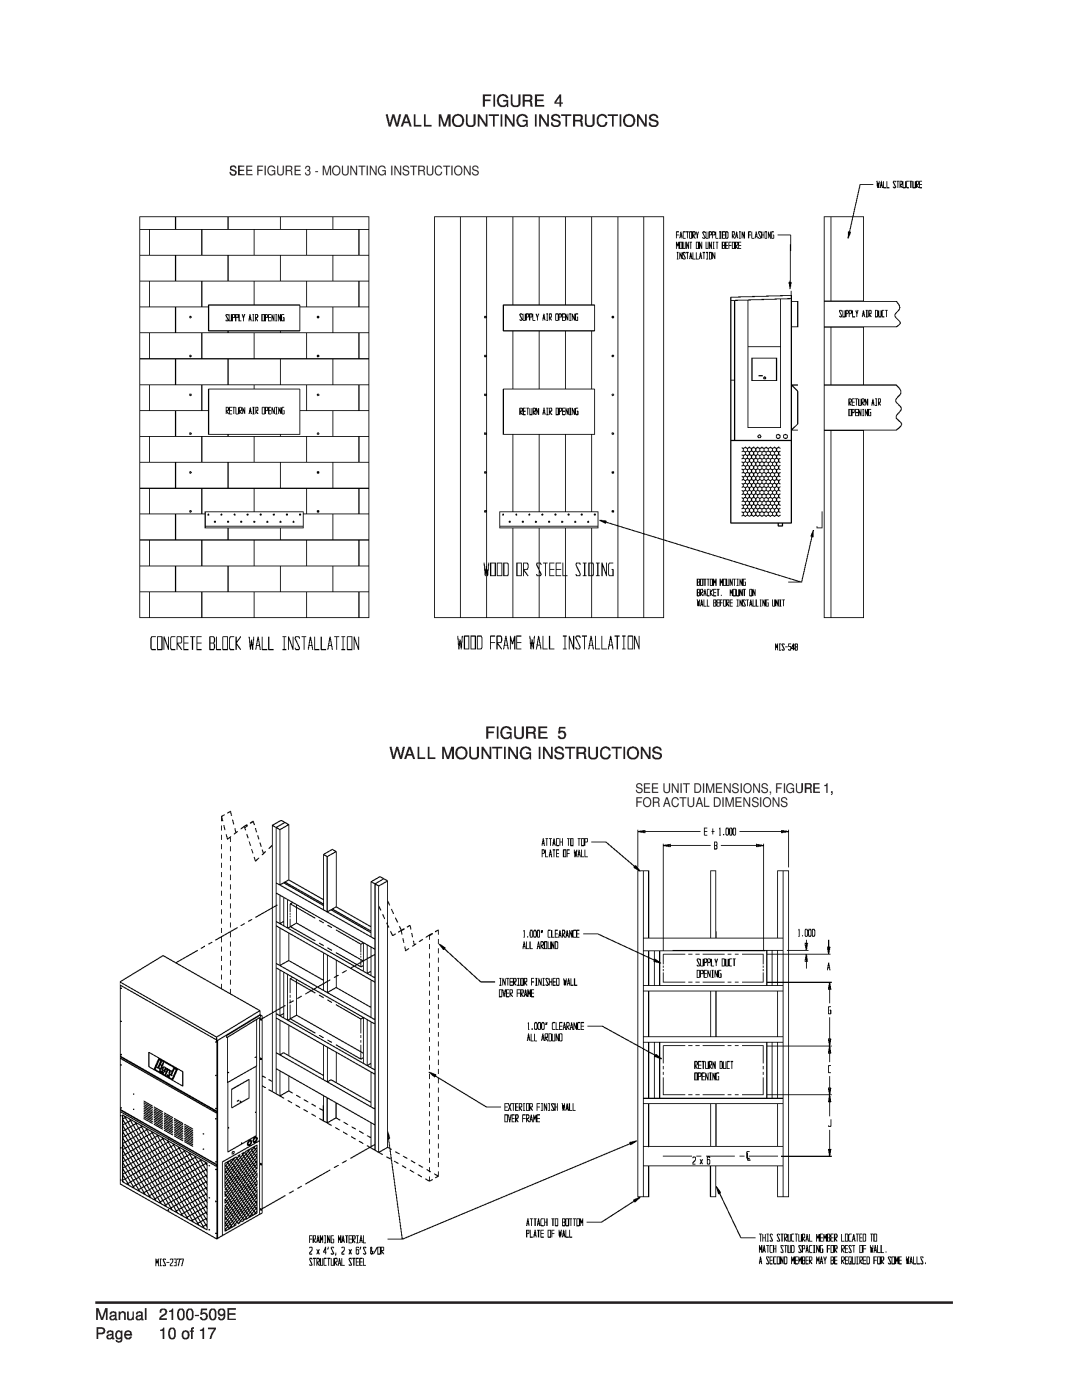 Bard W12A2-A installation instructions Figure Wall Mounting Instructions, Manual, 2100-509E, Page, 10 of 